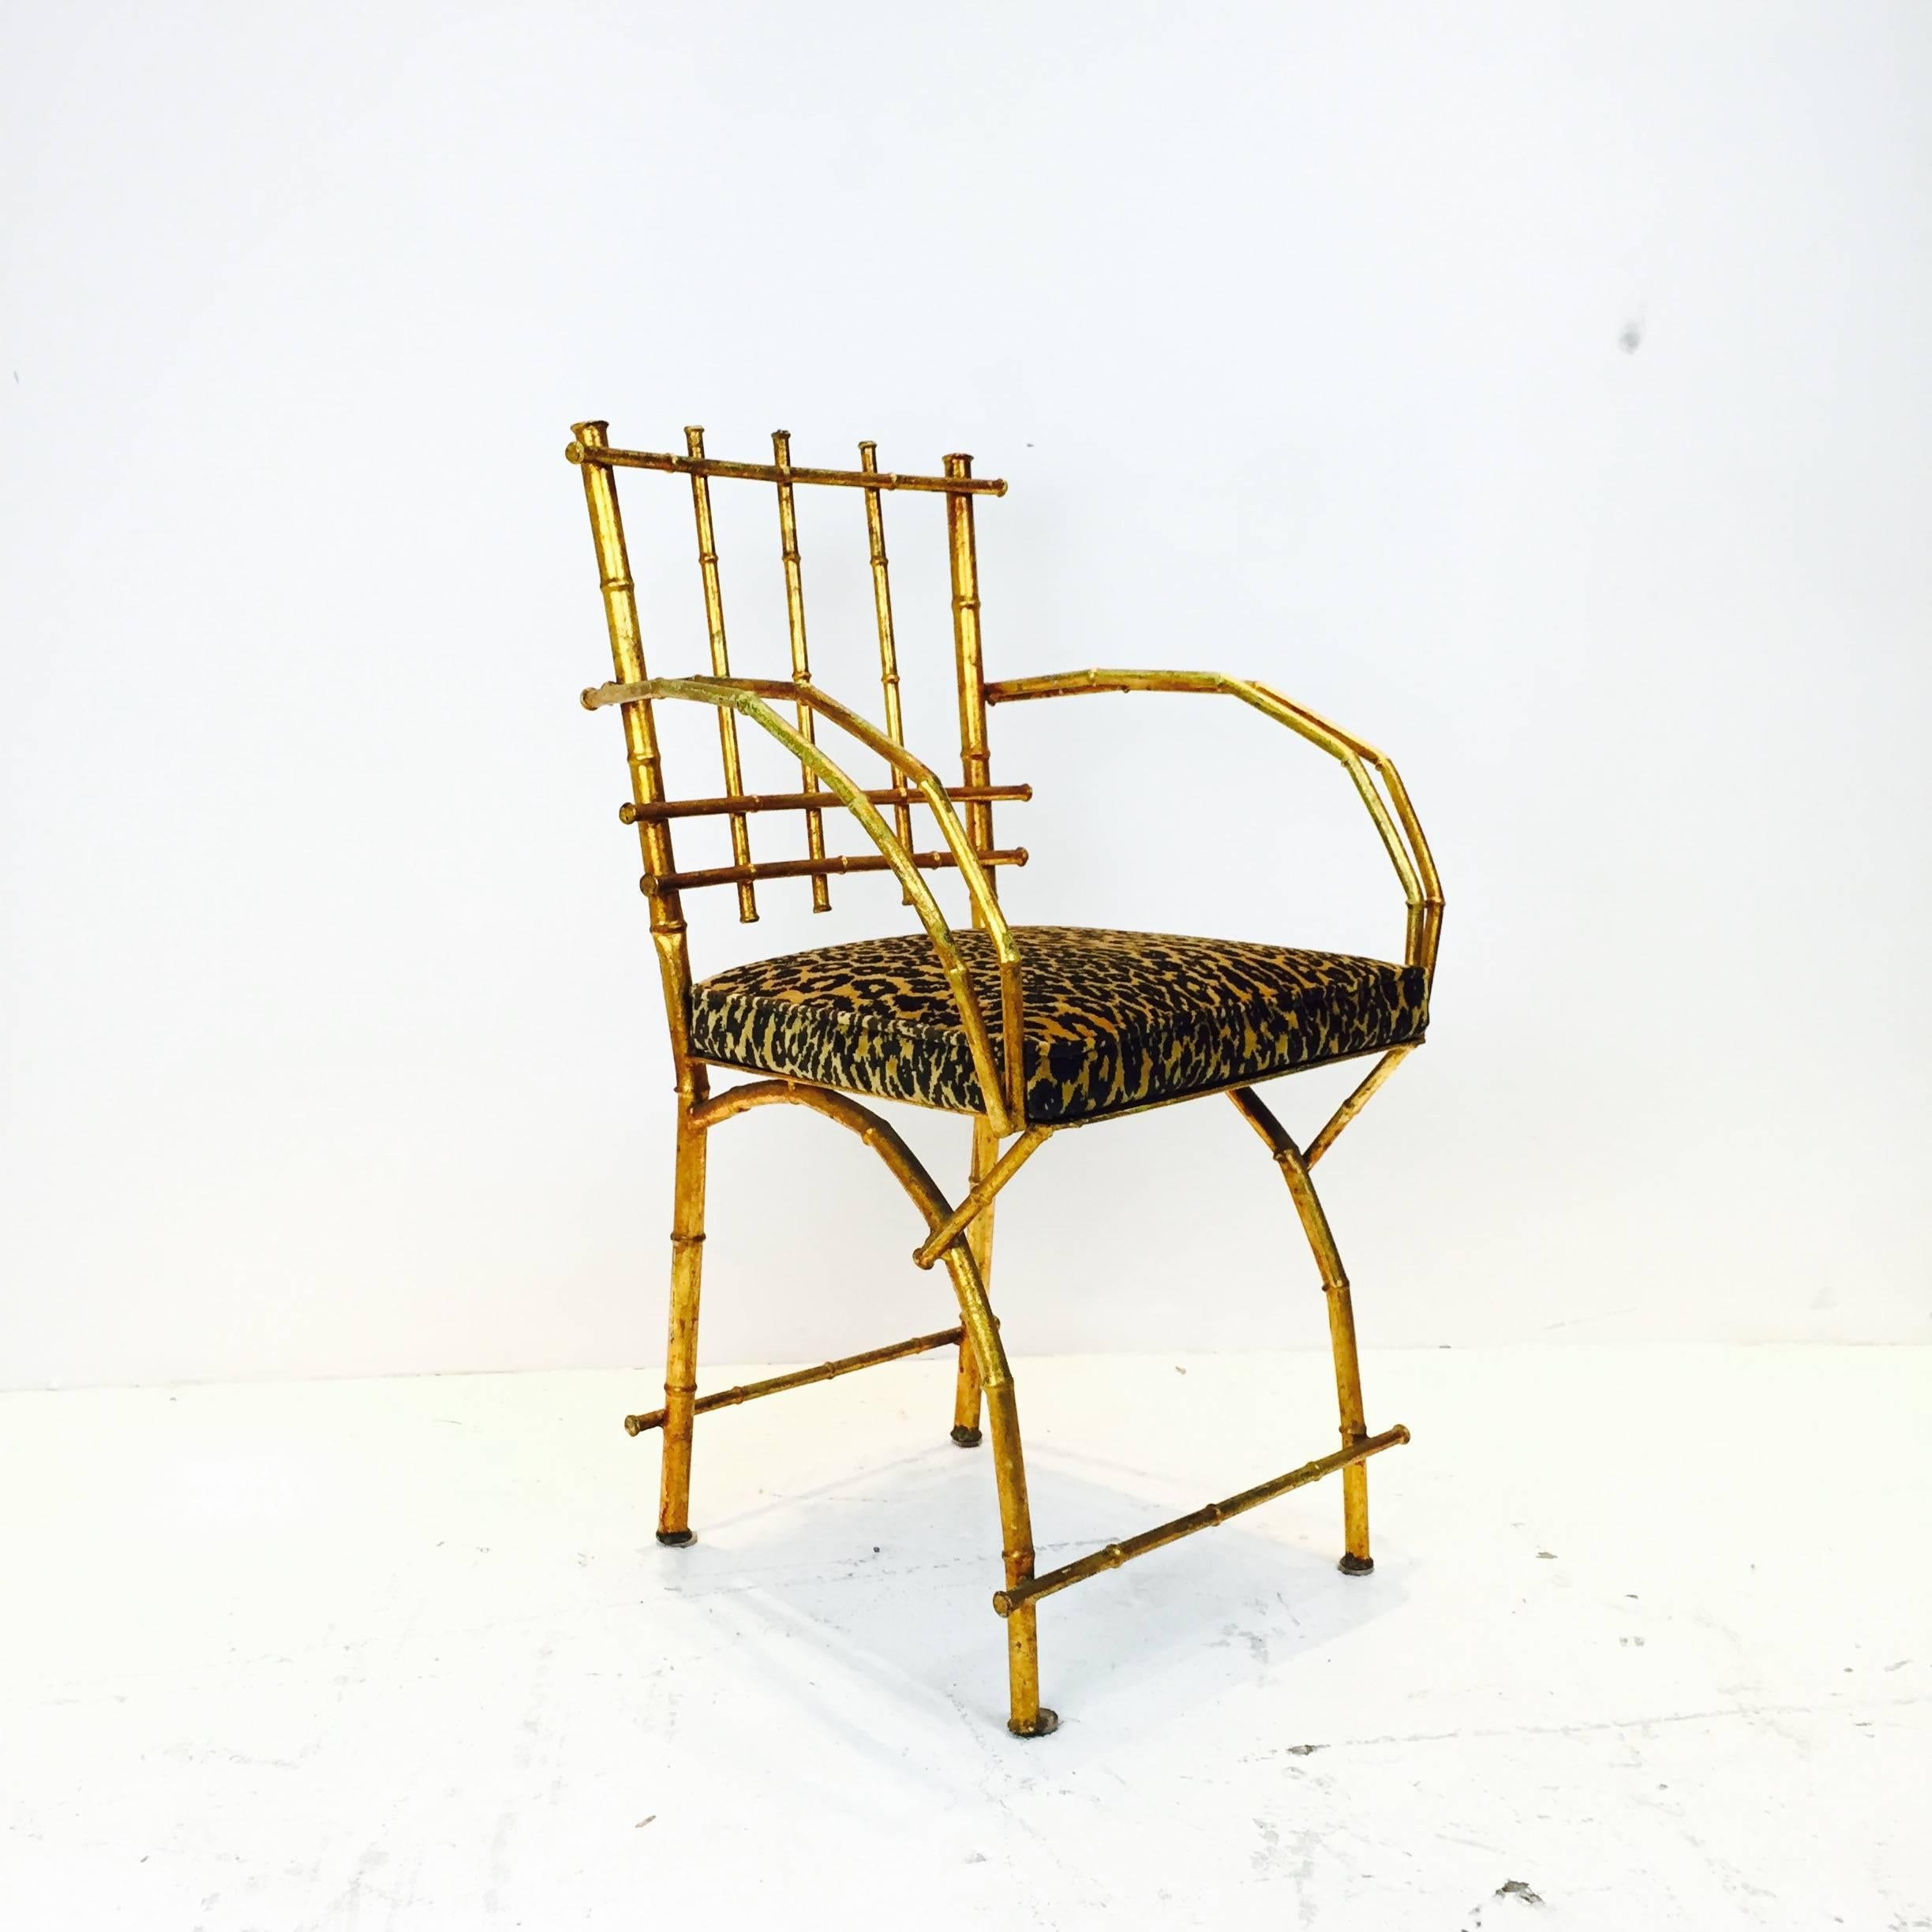 Gold leaf faux bamboo vanity chair.

Dimensions: 20.5" W x 18" D x 33" T,
seat height 18".